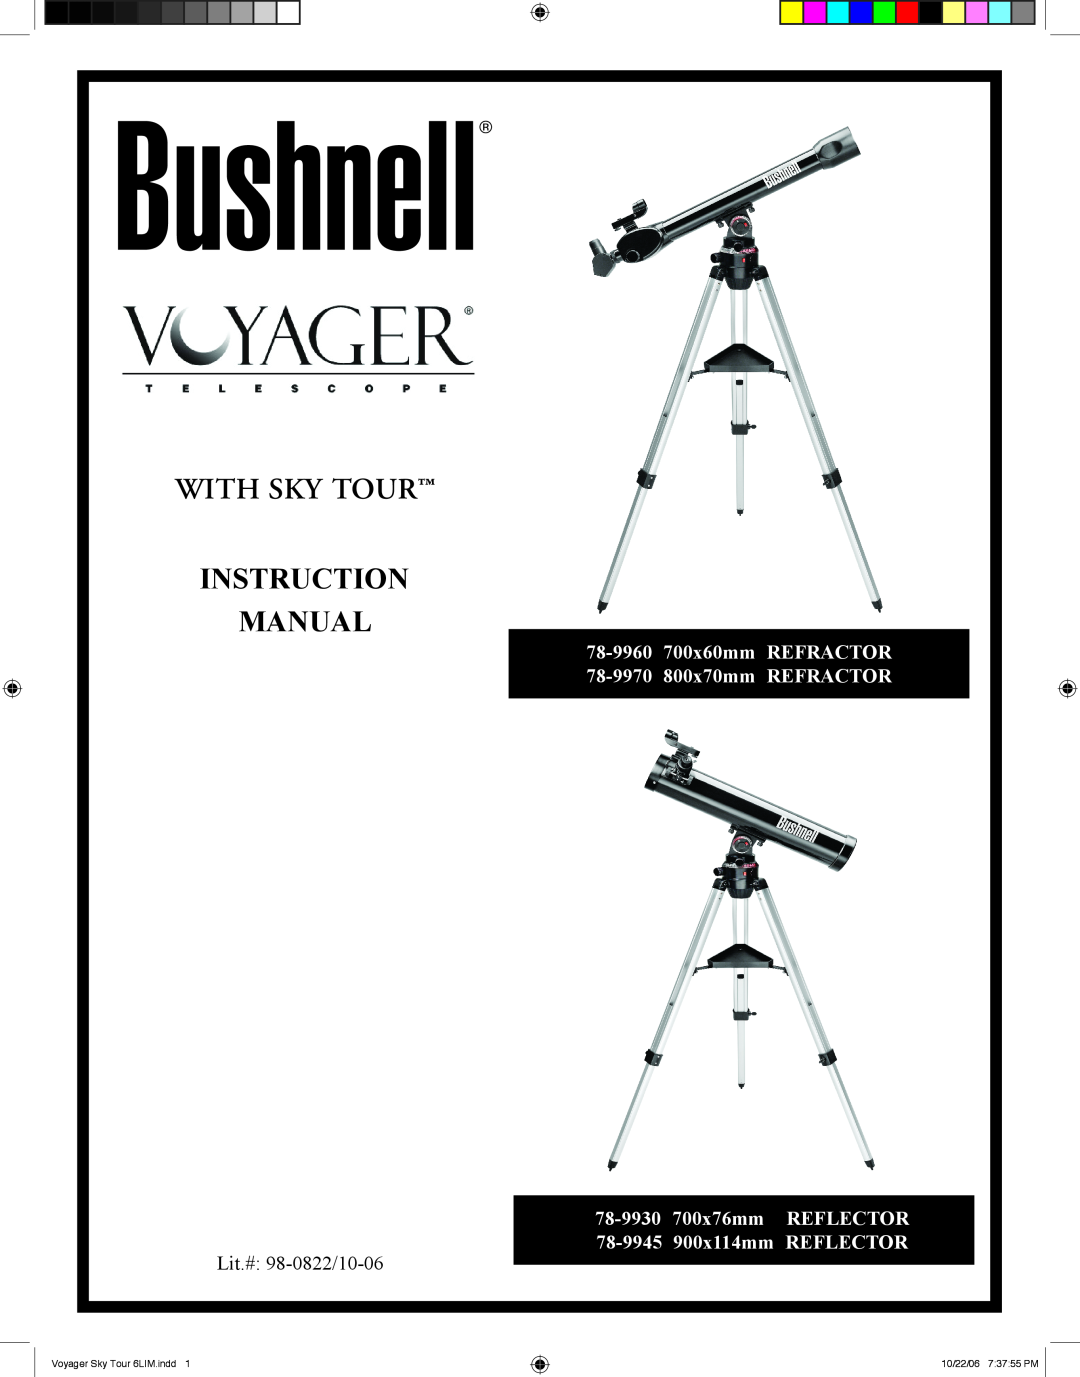 Bushnell instruction manual With sky tour Instruction Manual, 78-9960700x60mm refractor, 78-9970800x70mm refractor 